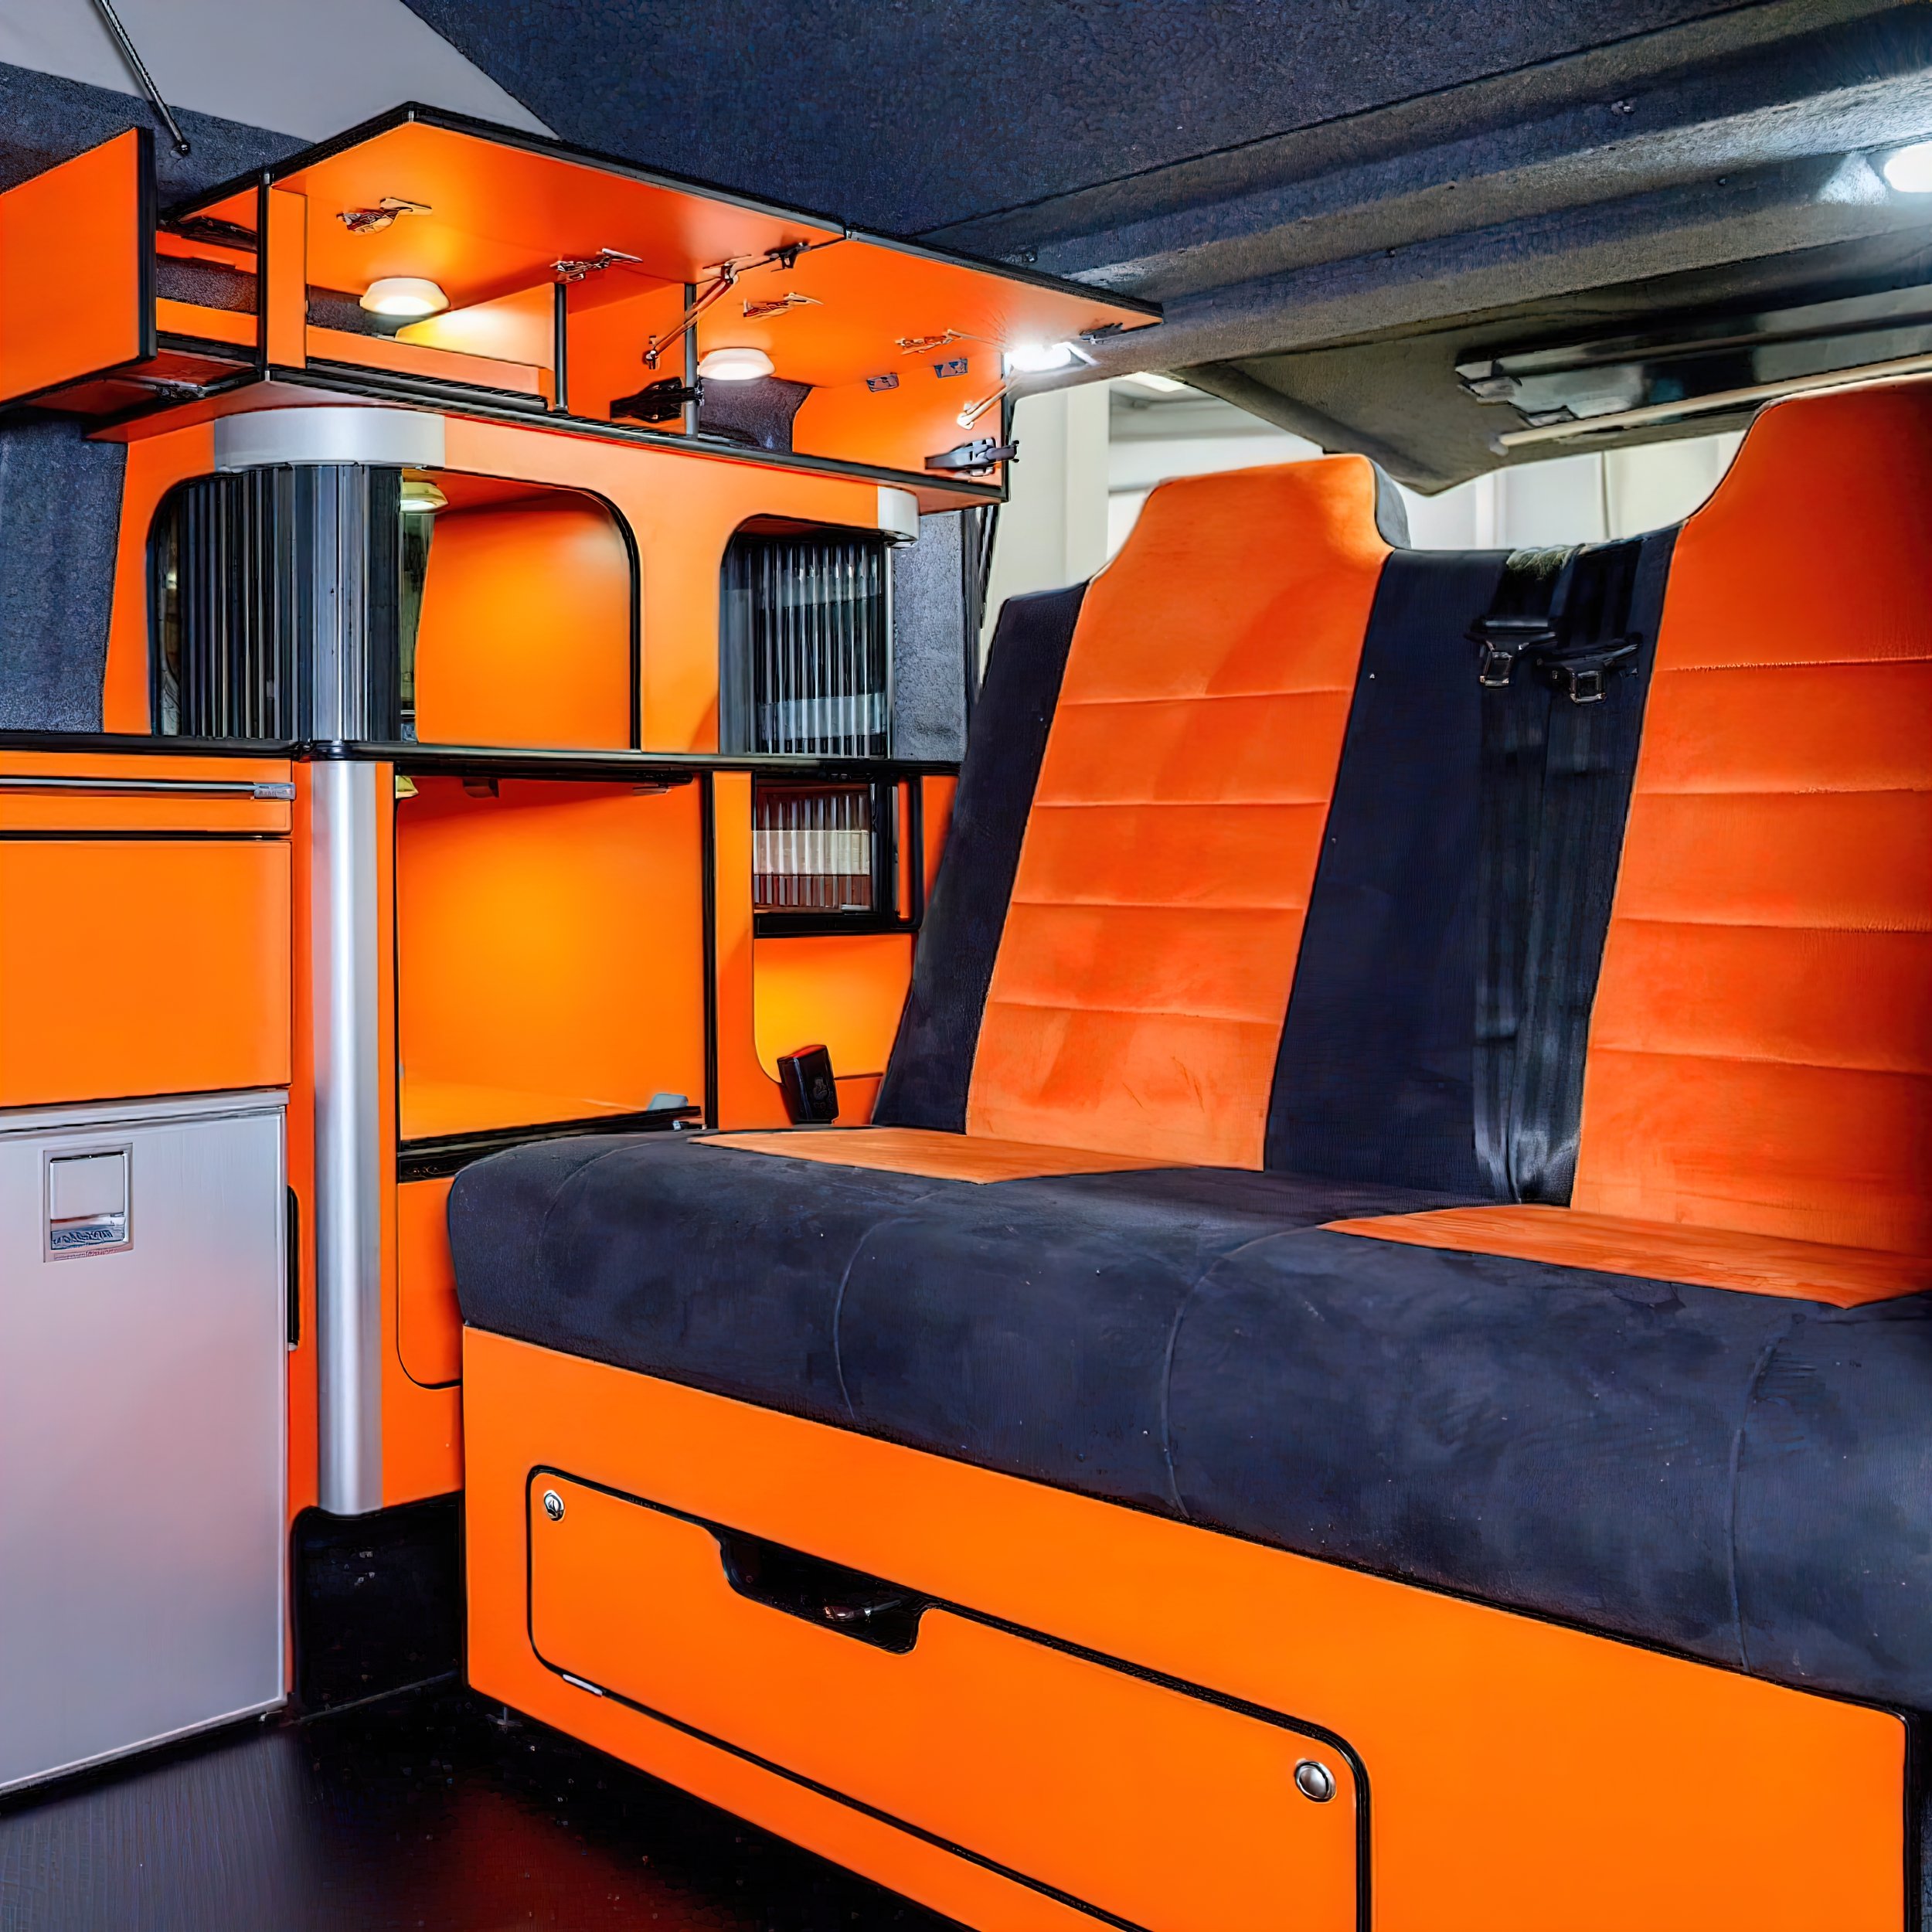  Taking a peek inside, we see that the company has done some things with the base PHEV van. Such as the side kitchen, which has been partially replaced with easily removable modules.&nbsp;&nbsp;  This allows for a more flexible trip and can hopefully